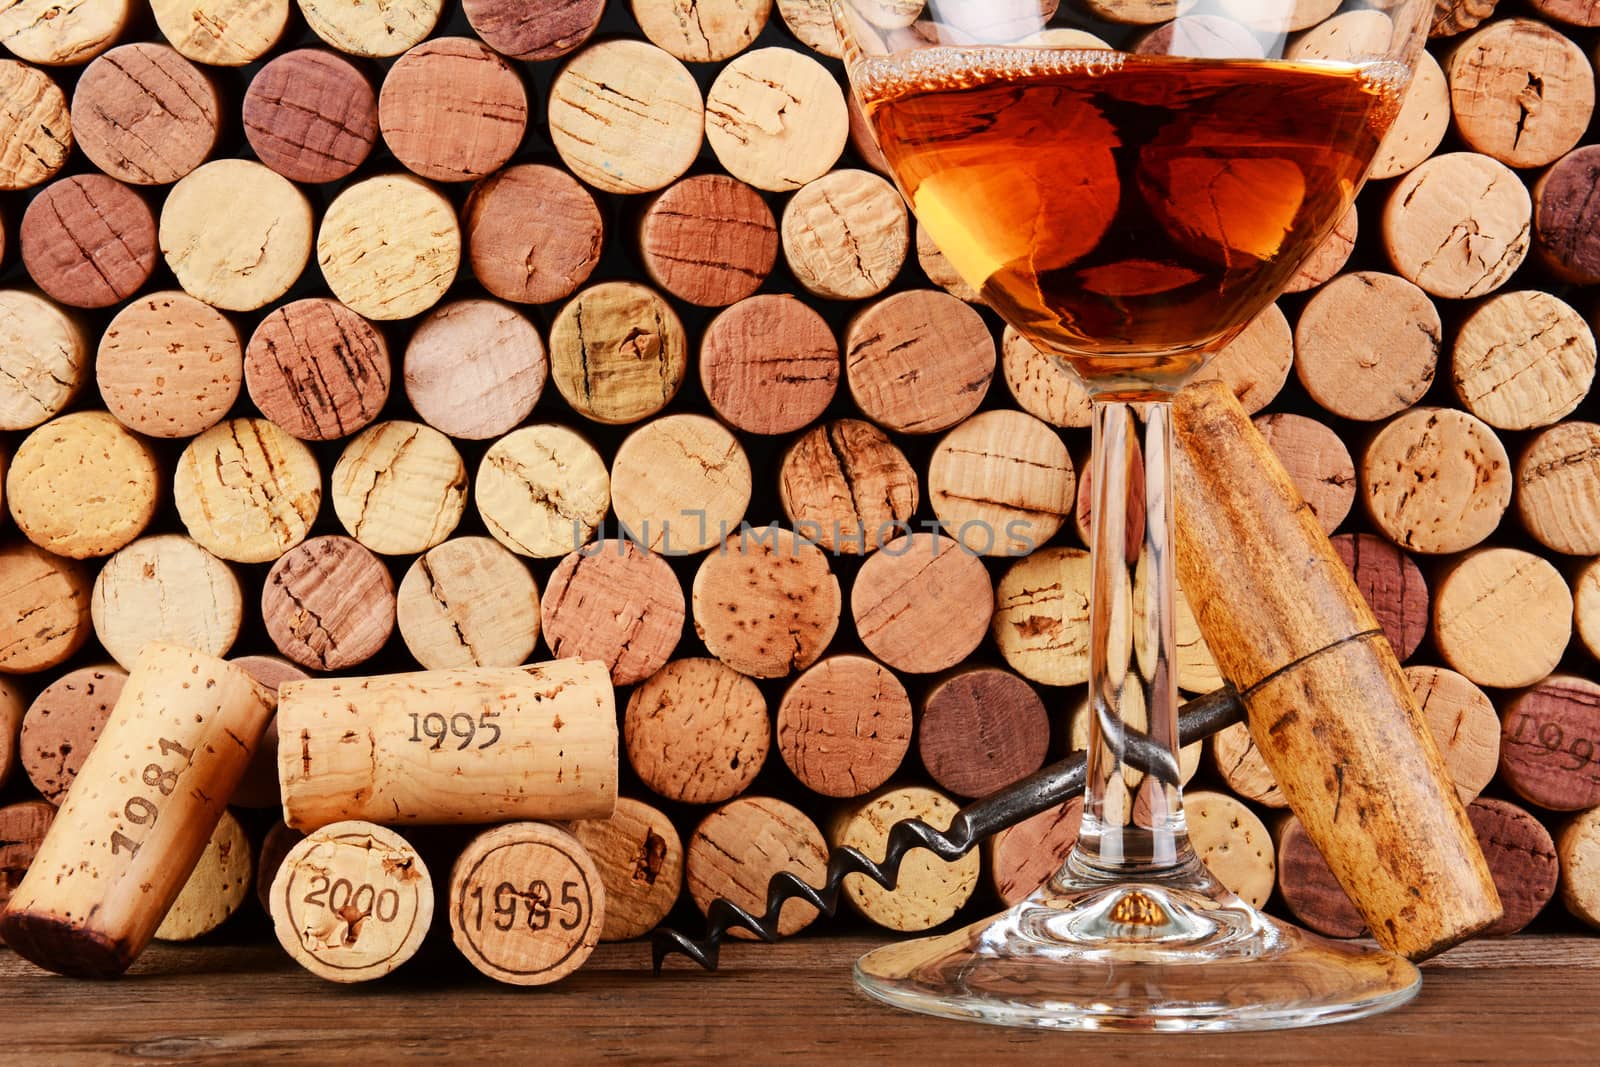 Closeup of a wineglass in front of a wall of used corks. An antique cork screw and dated corks are adjacent to the glass. Horizontal format filling the frame.